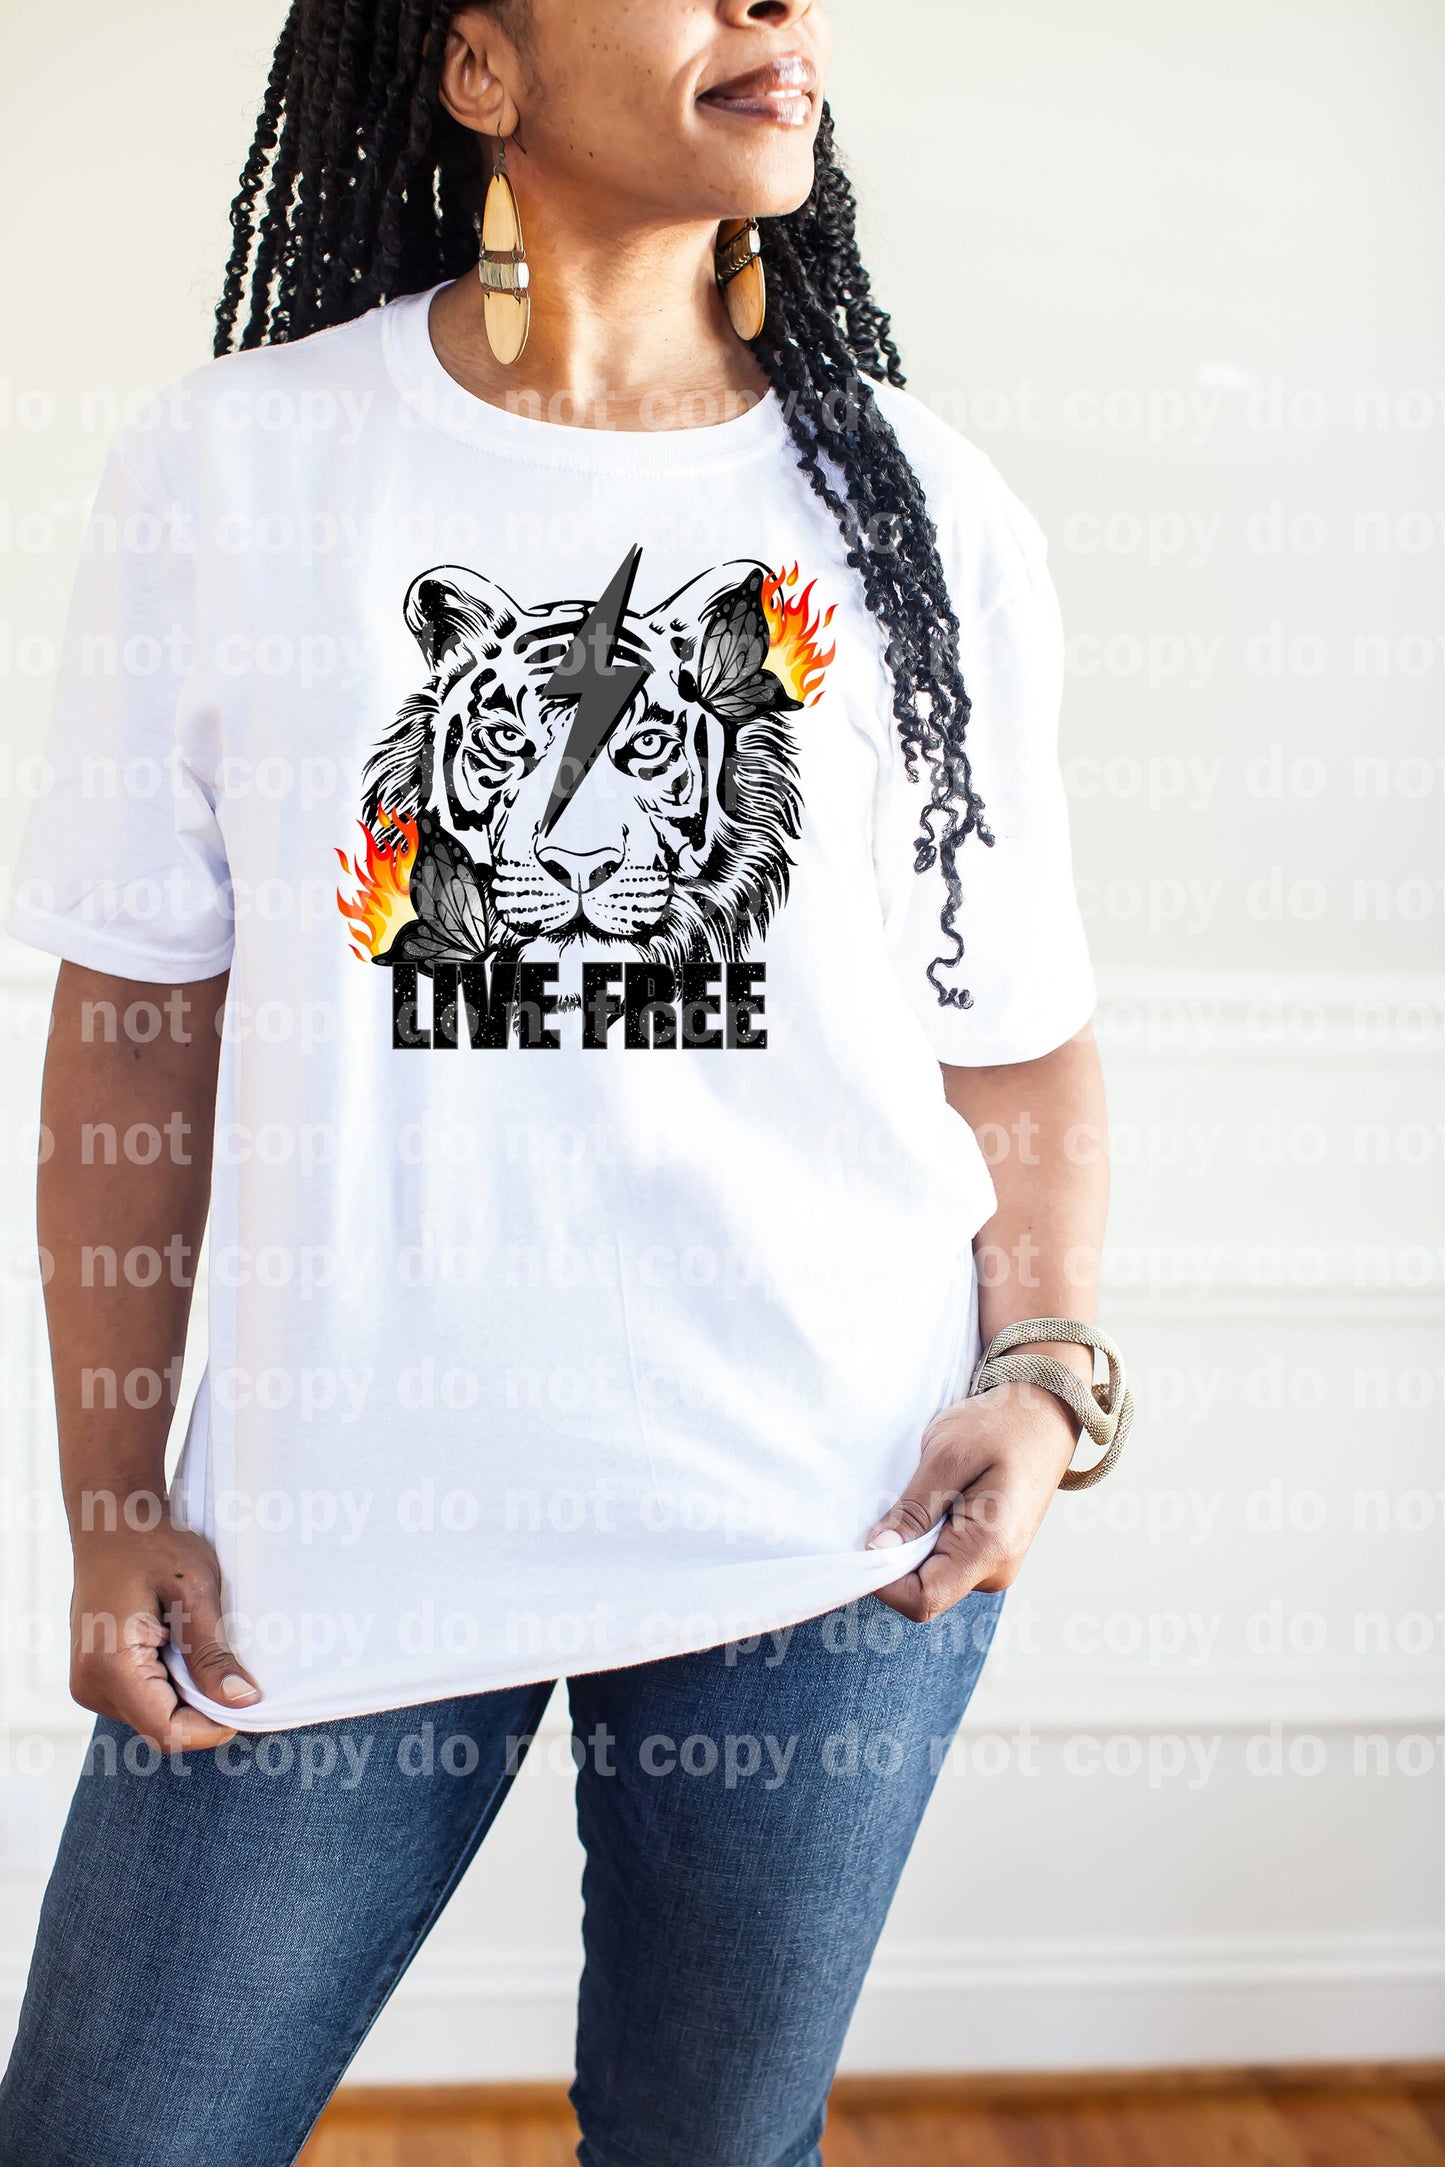 Live Free Tiger Distressed Dream Print or Sublimation Print